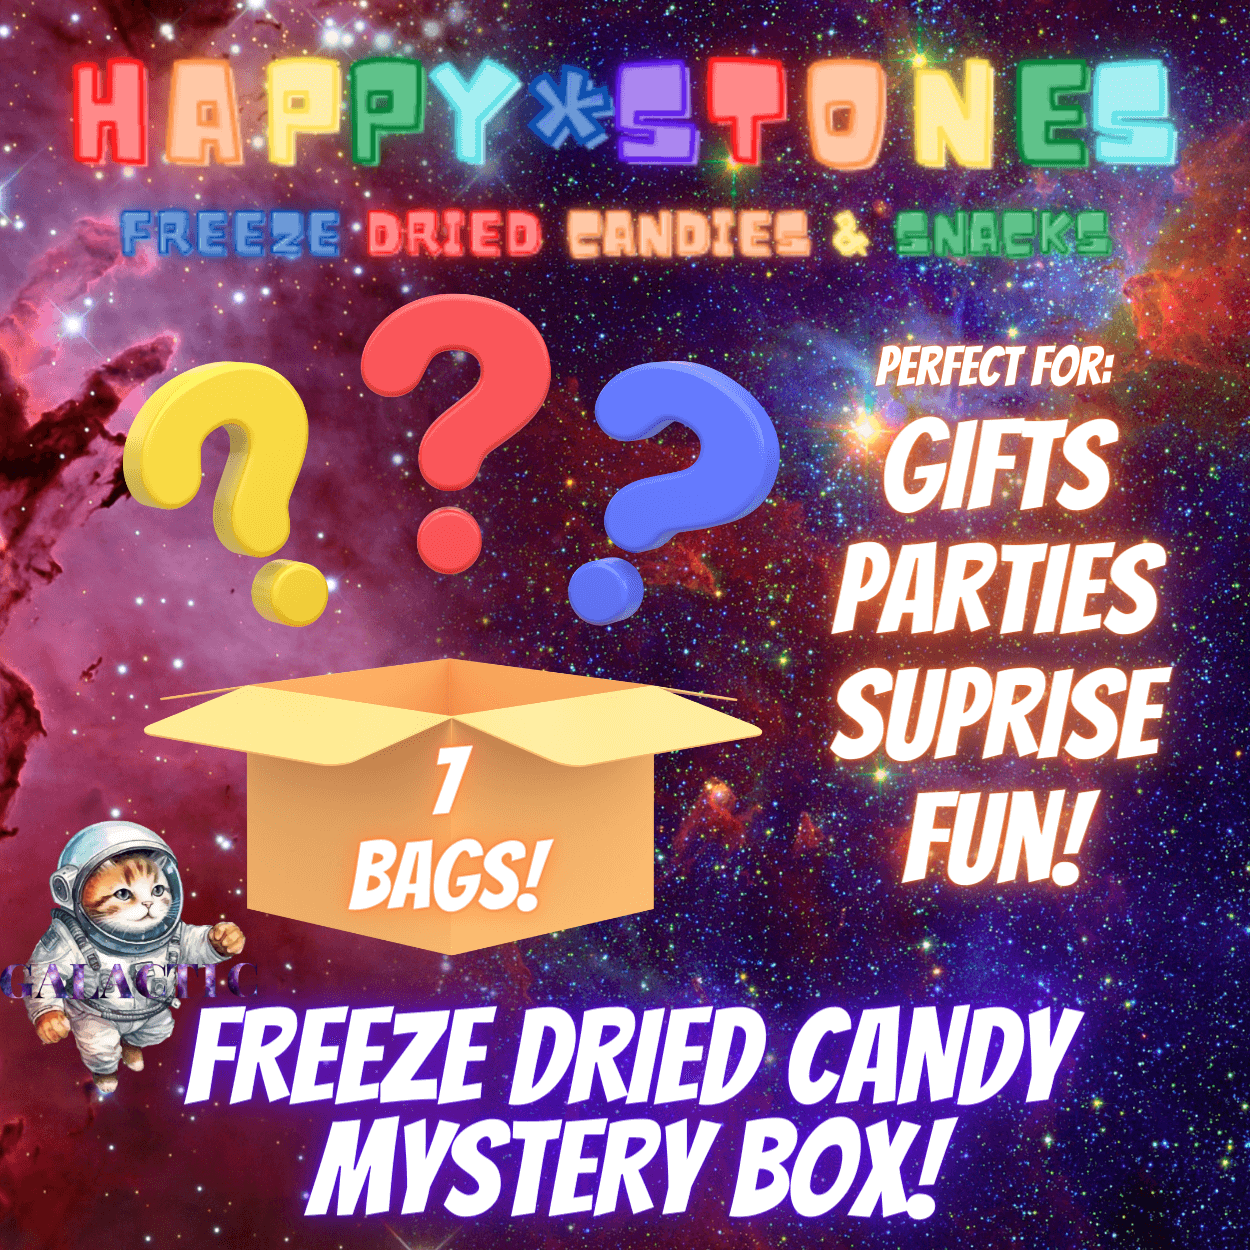 Freeze Dried Candy Mystery Box GALACTIC Sampler Box